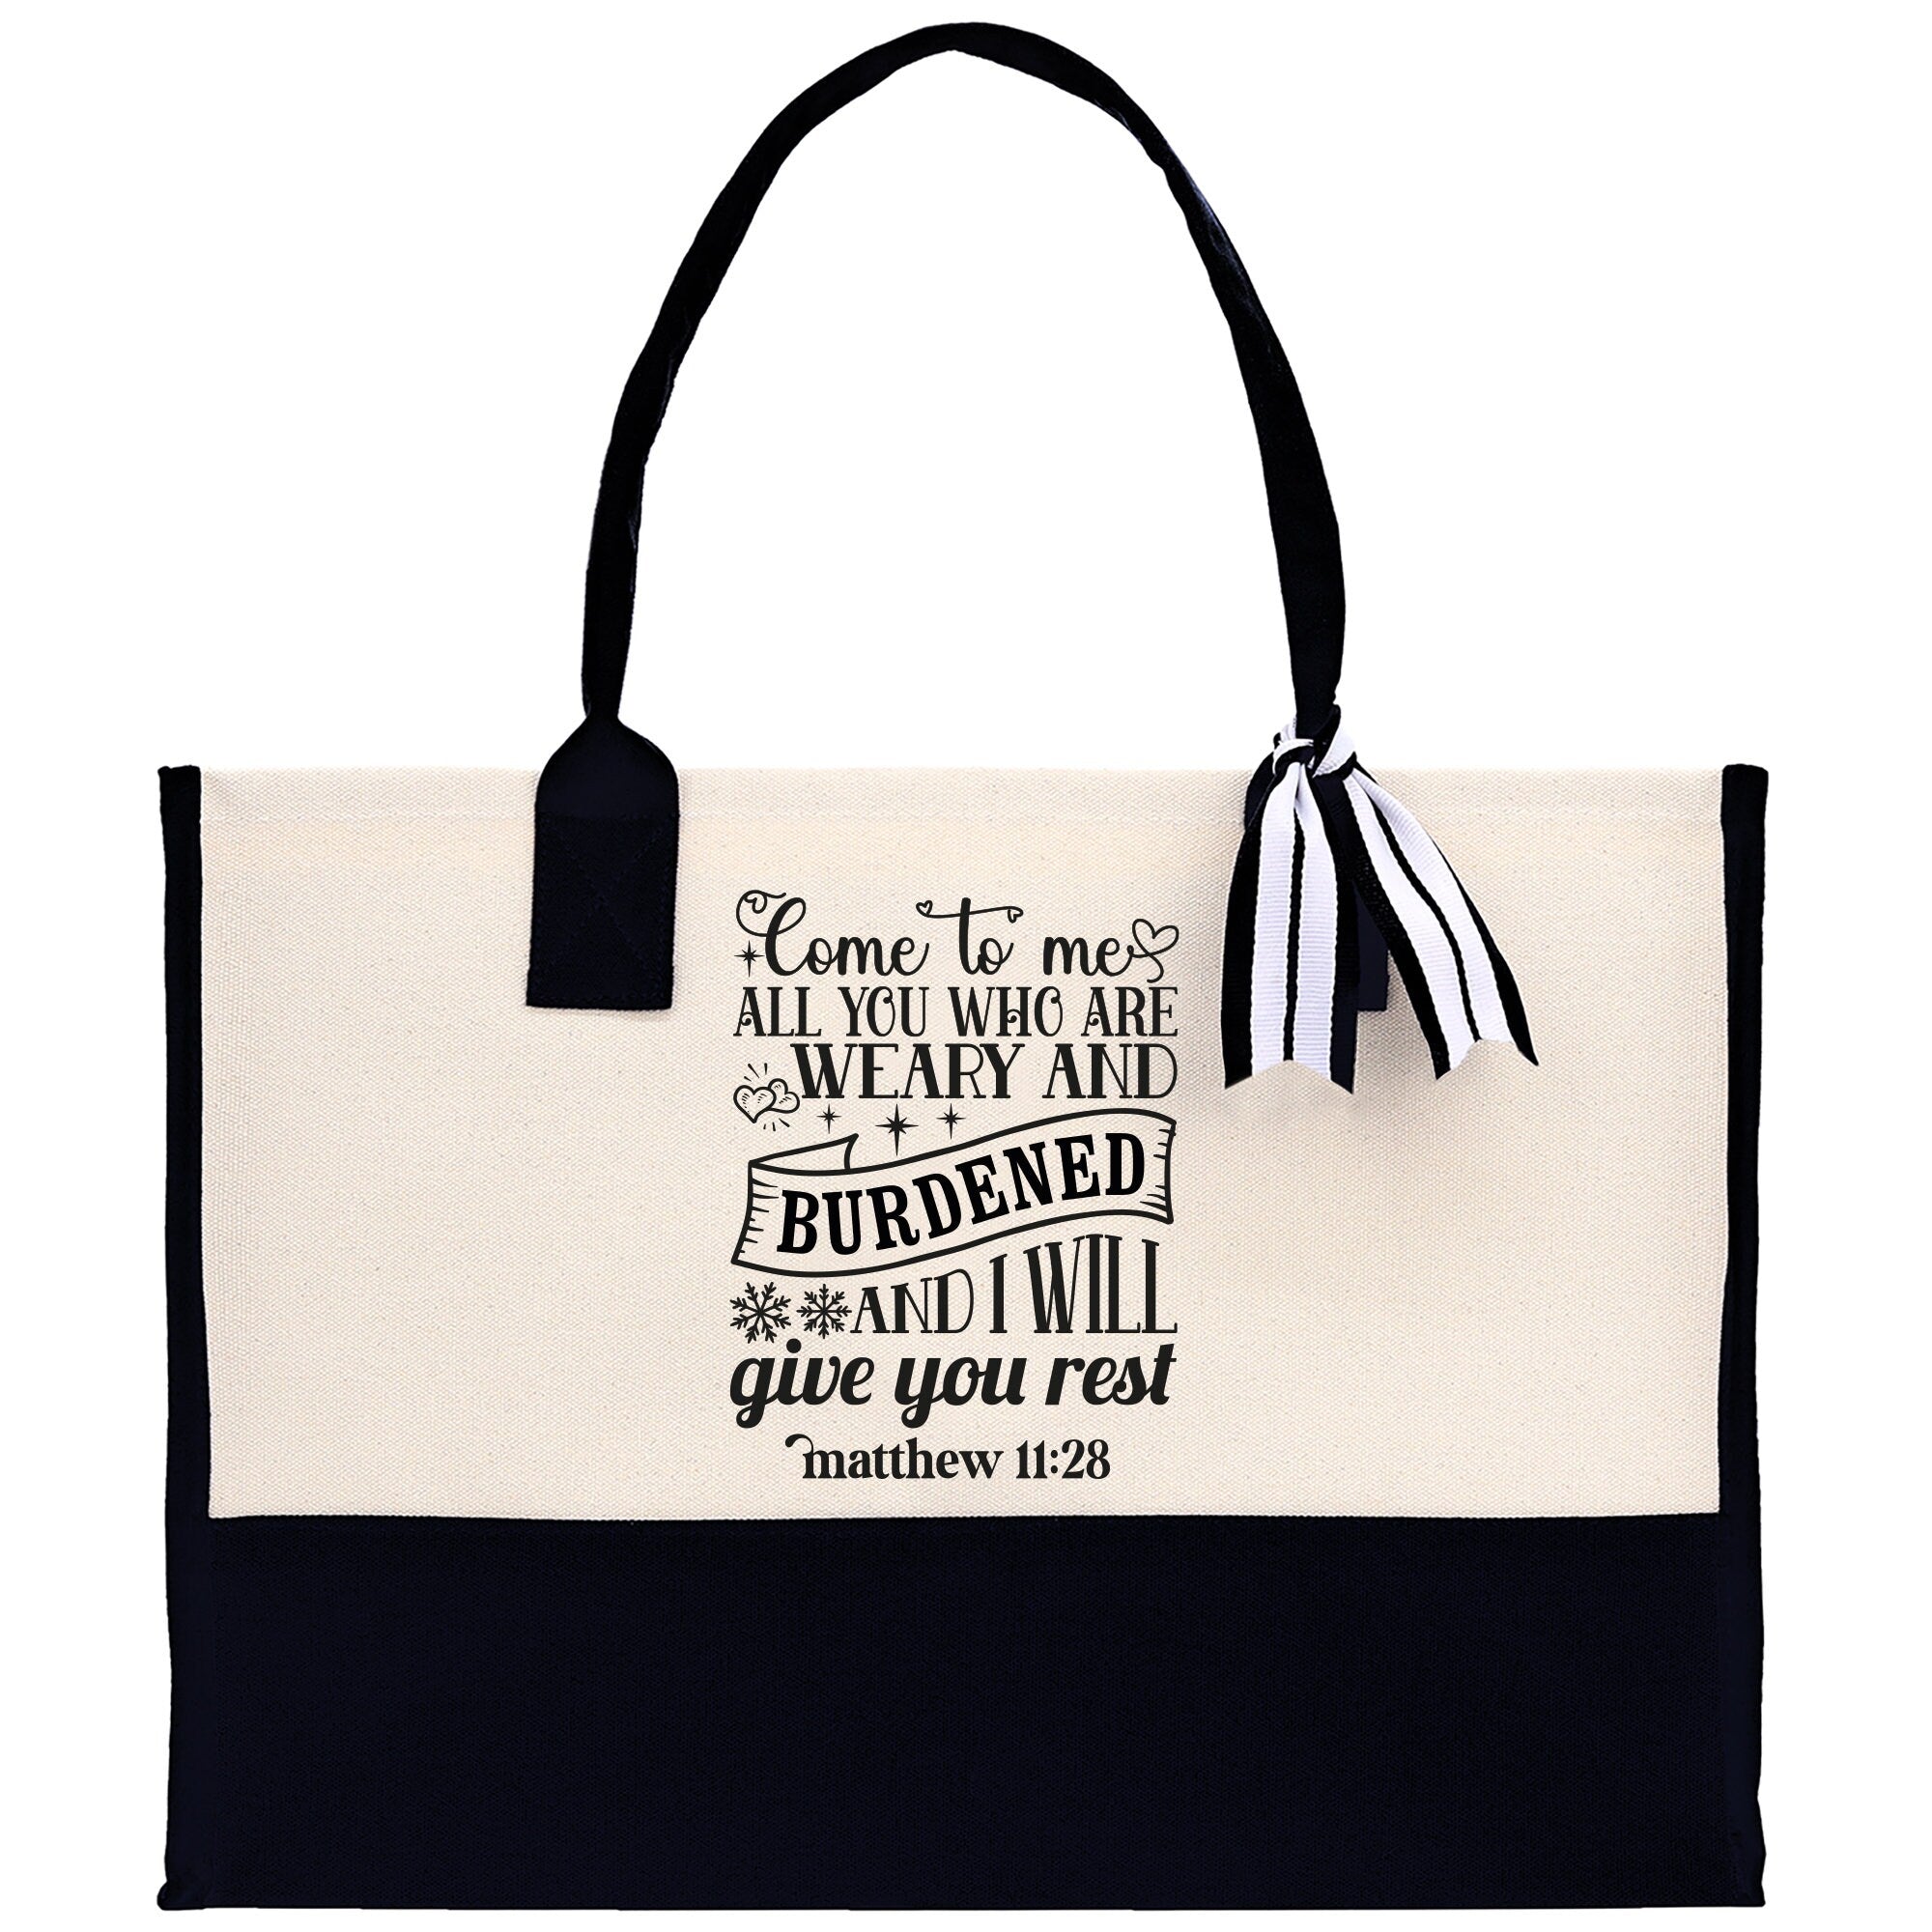 Come To Me All You Who Are Weary And Burdened Matthew 11:28 Religious Tote Bag for Women Bible Verse Canvas Tote Bag Religious Church Gifts